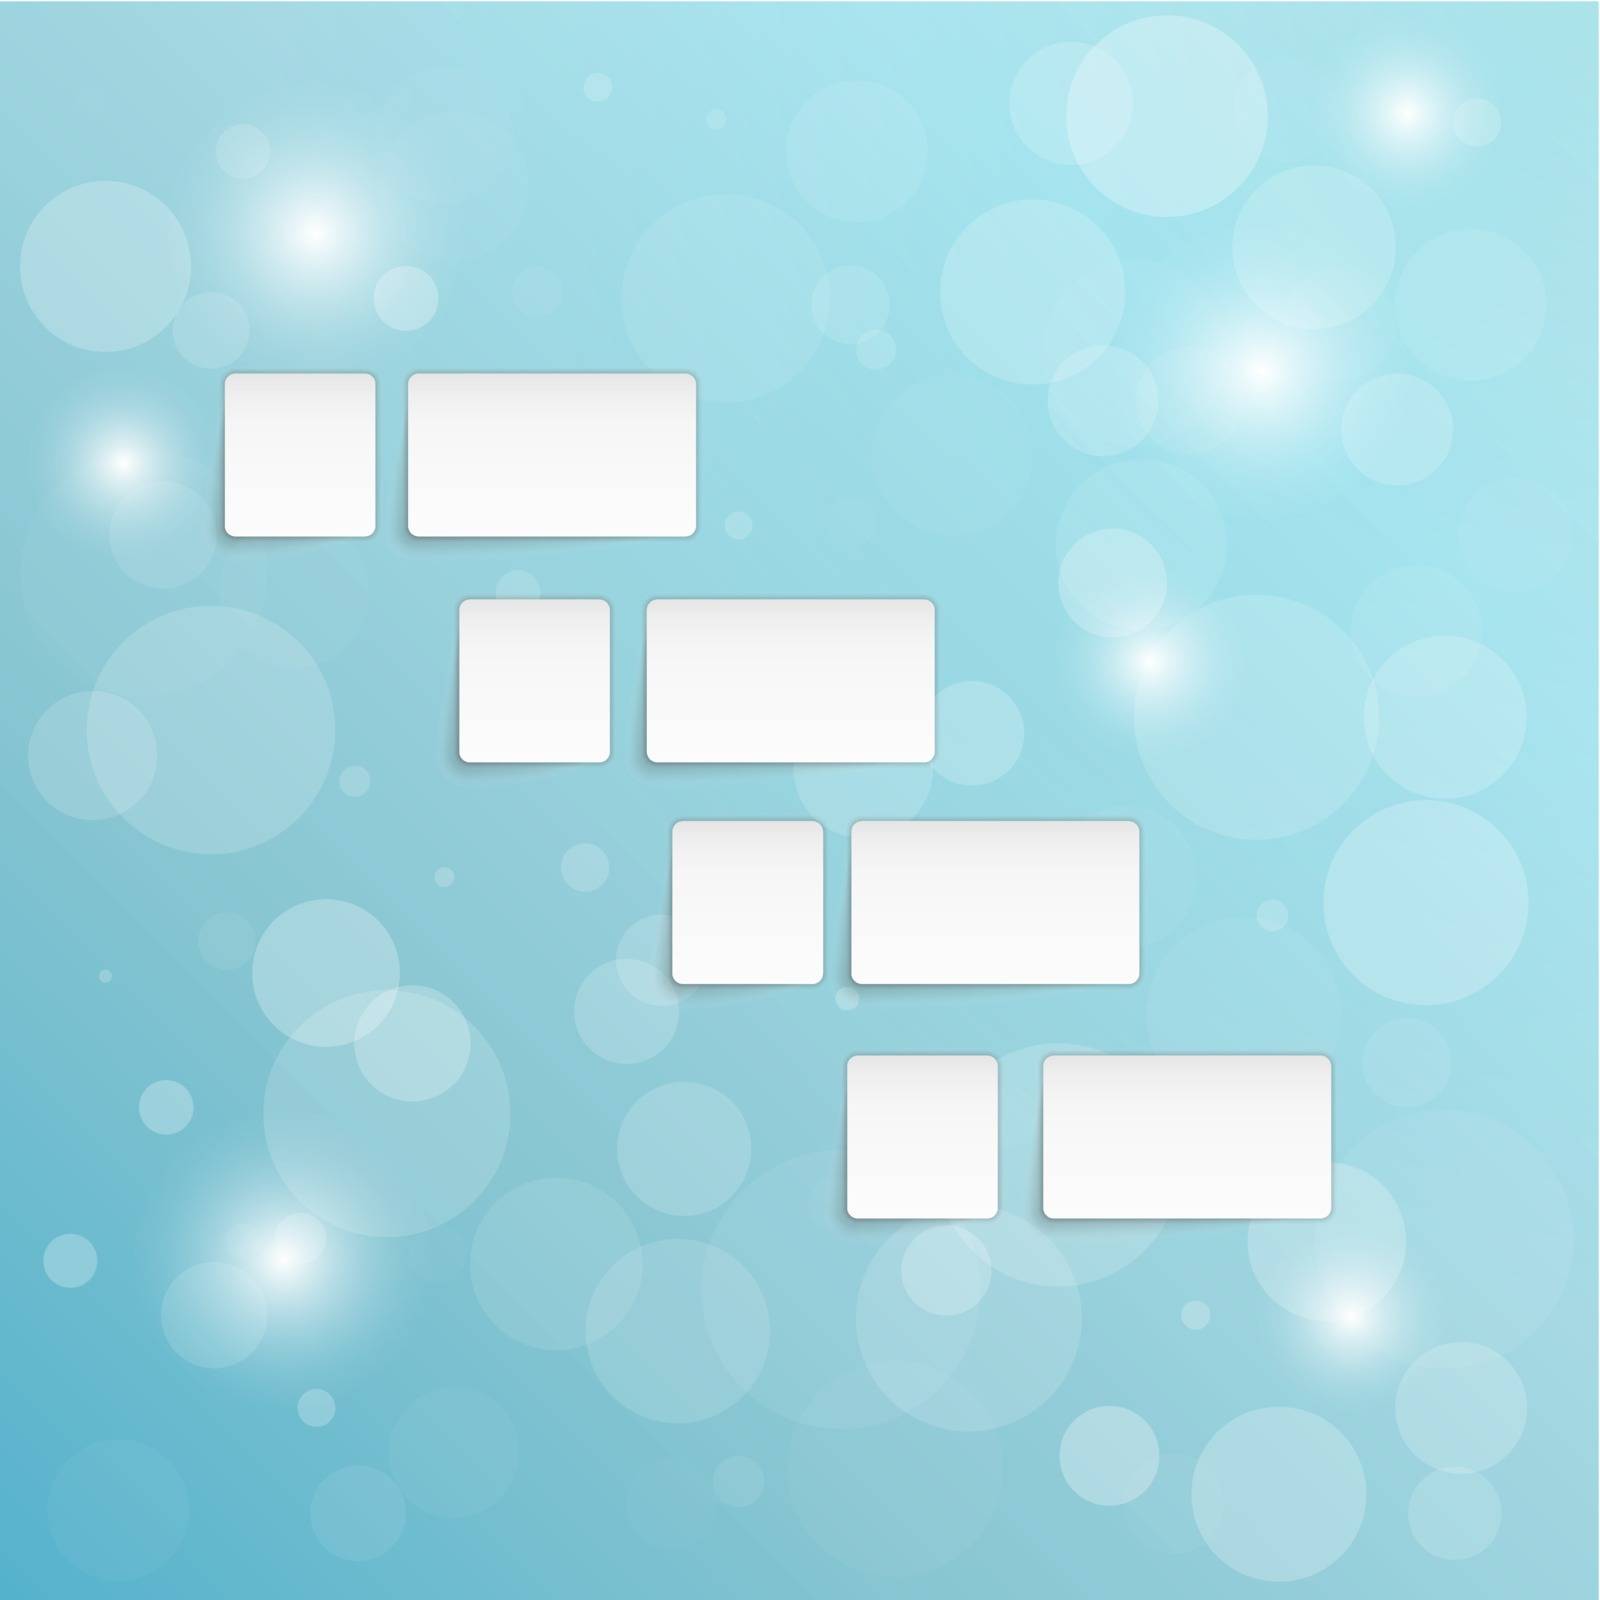 blank paper blocks on blue background with shining balls